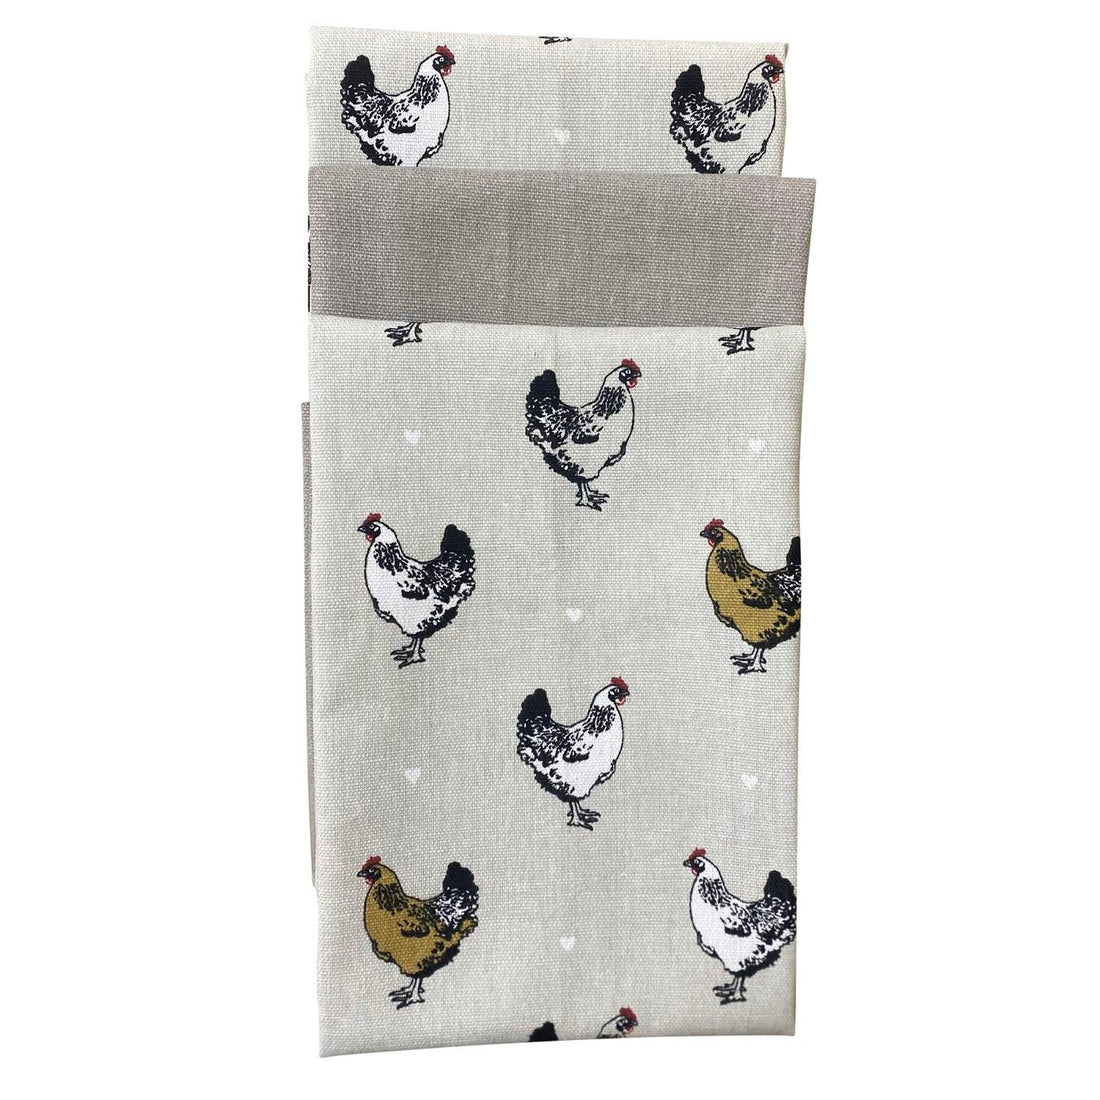 Pack of Three Tea Towels With A Chicken Print Design - £18.99 - Decorative Kitchen Items 